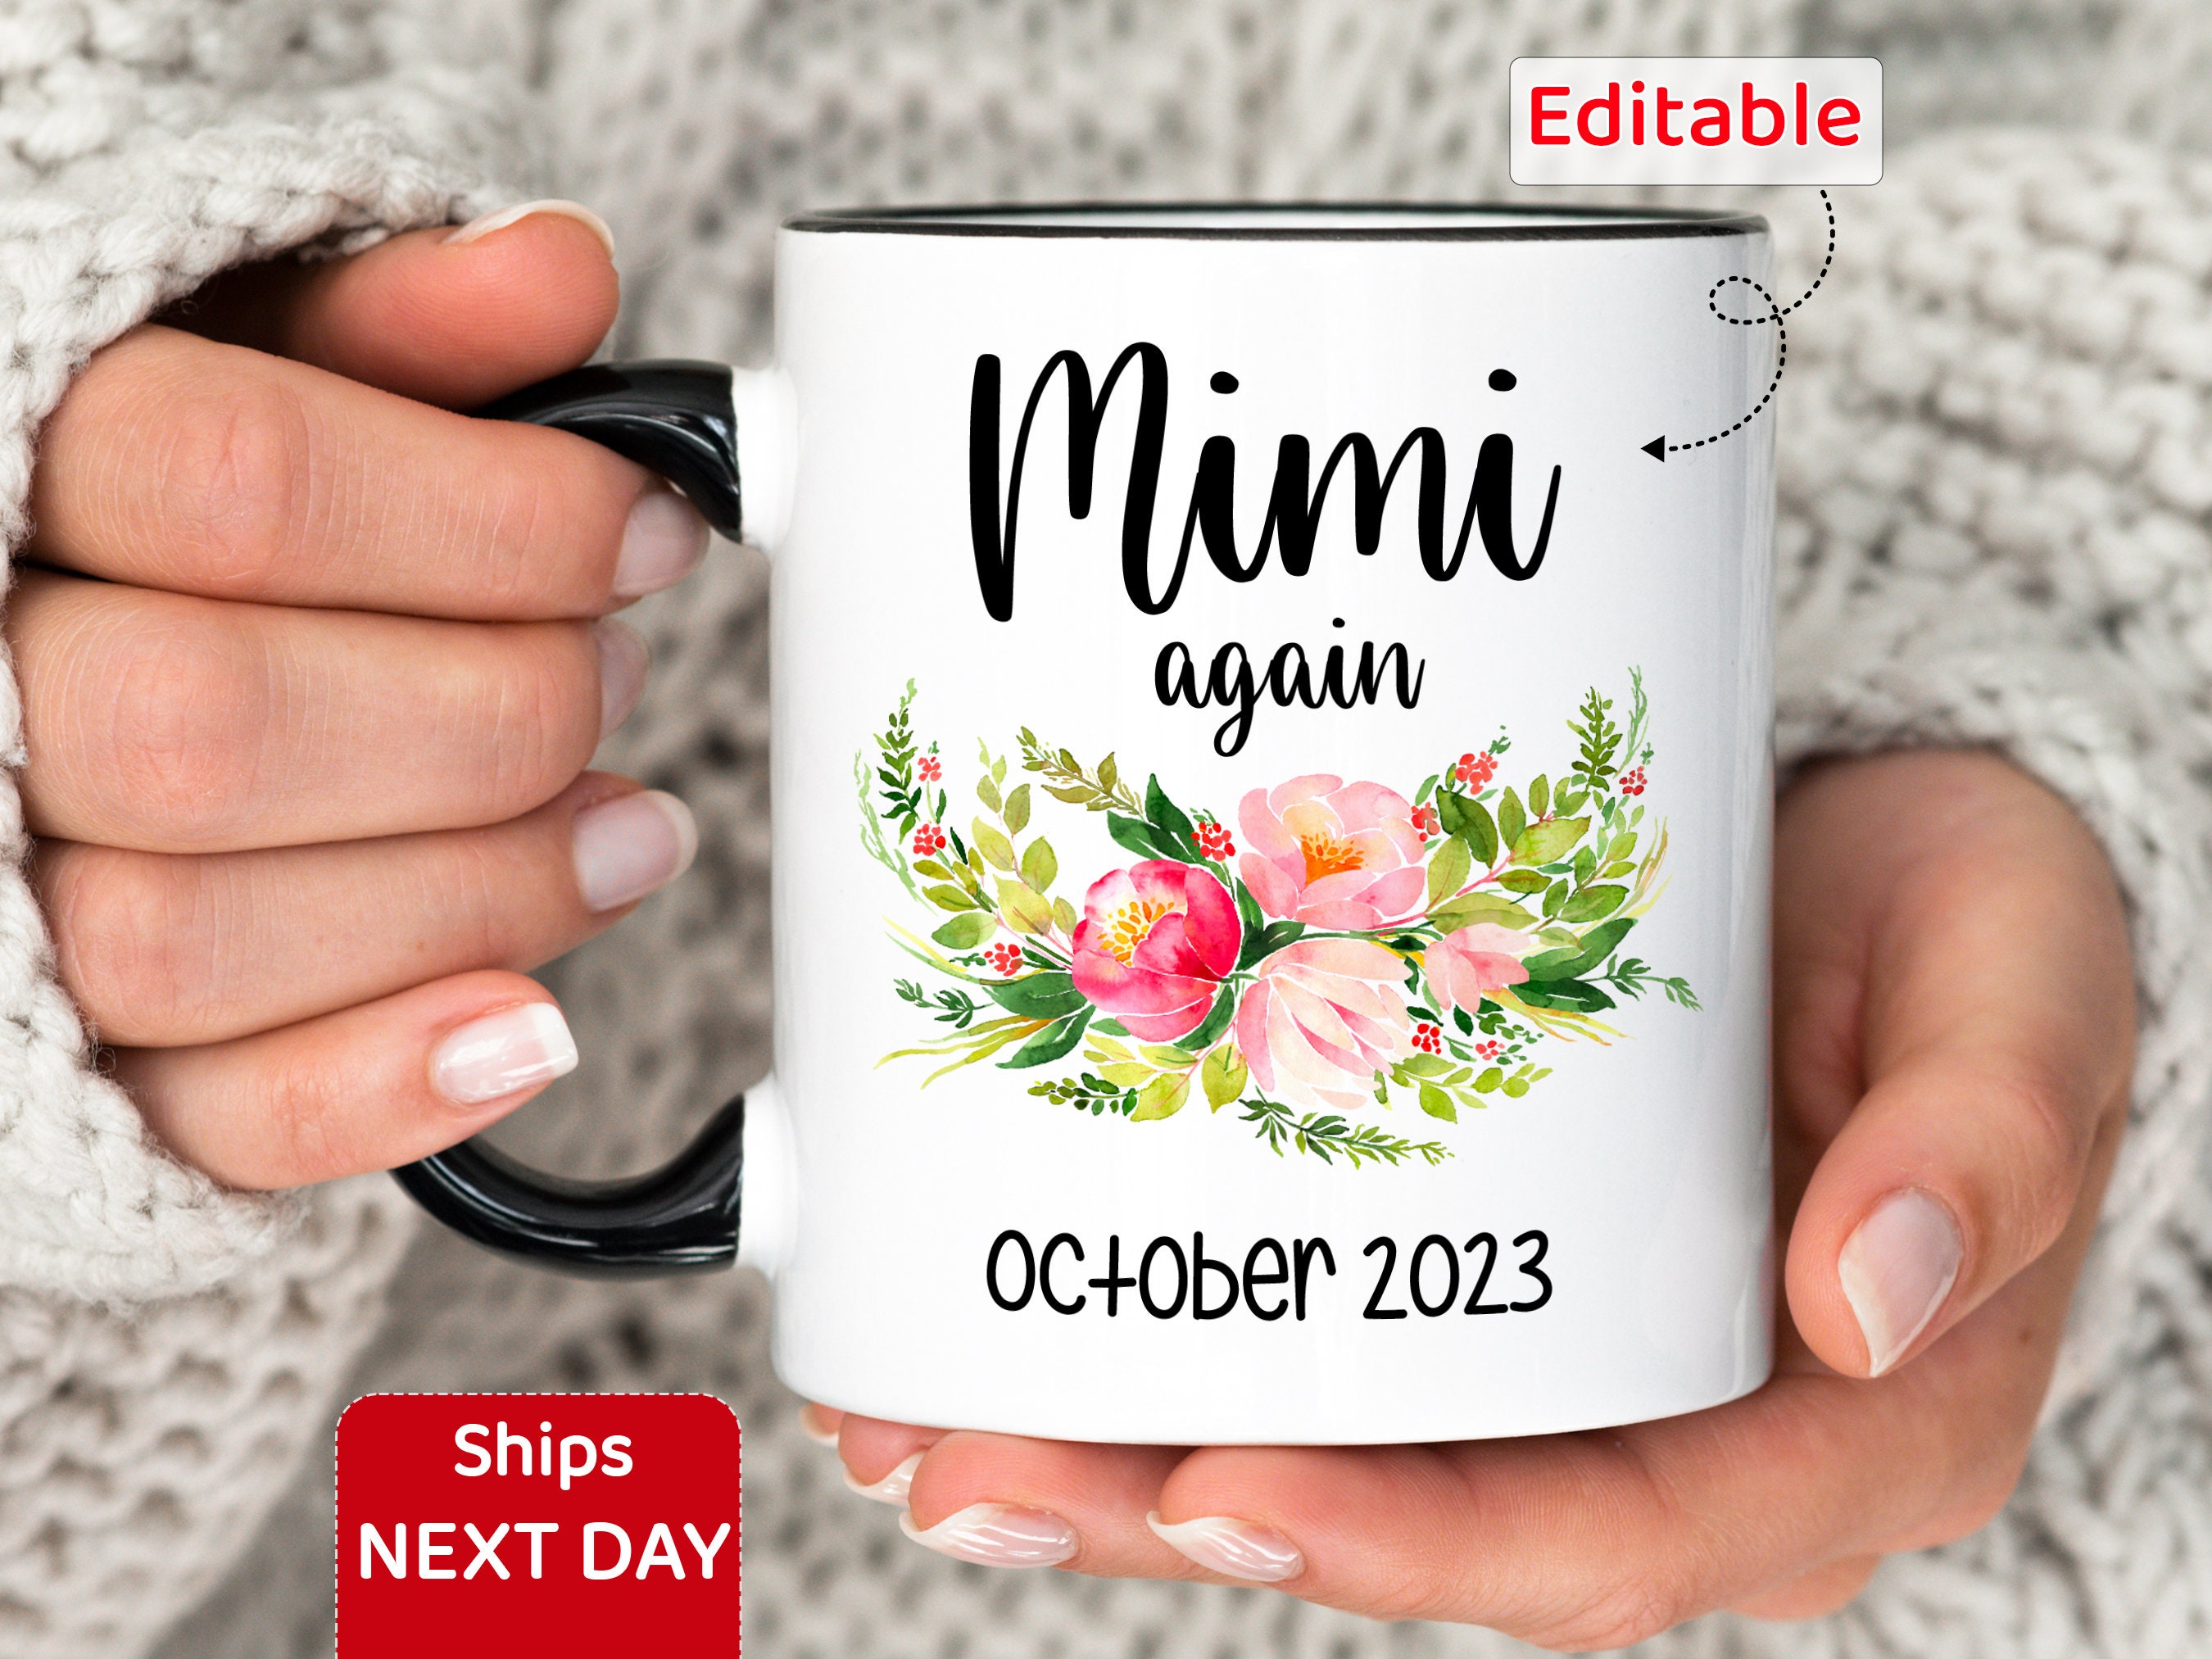 SassyCups Best Mimi Ever Insulated Tumbler Cup with Straw and Lid - Coffee  Mug Gift for Grandma - Wo…See more SassyCups Best Mimi Ever Insulated